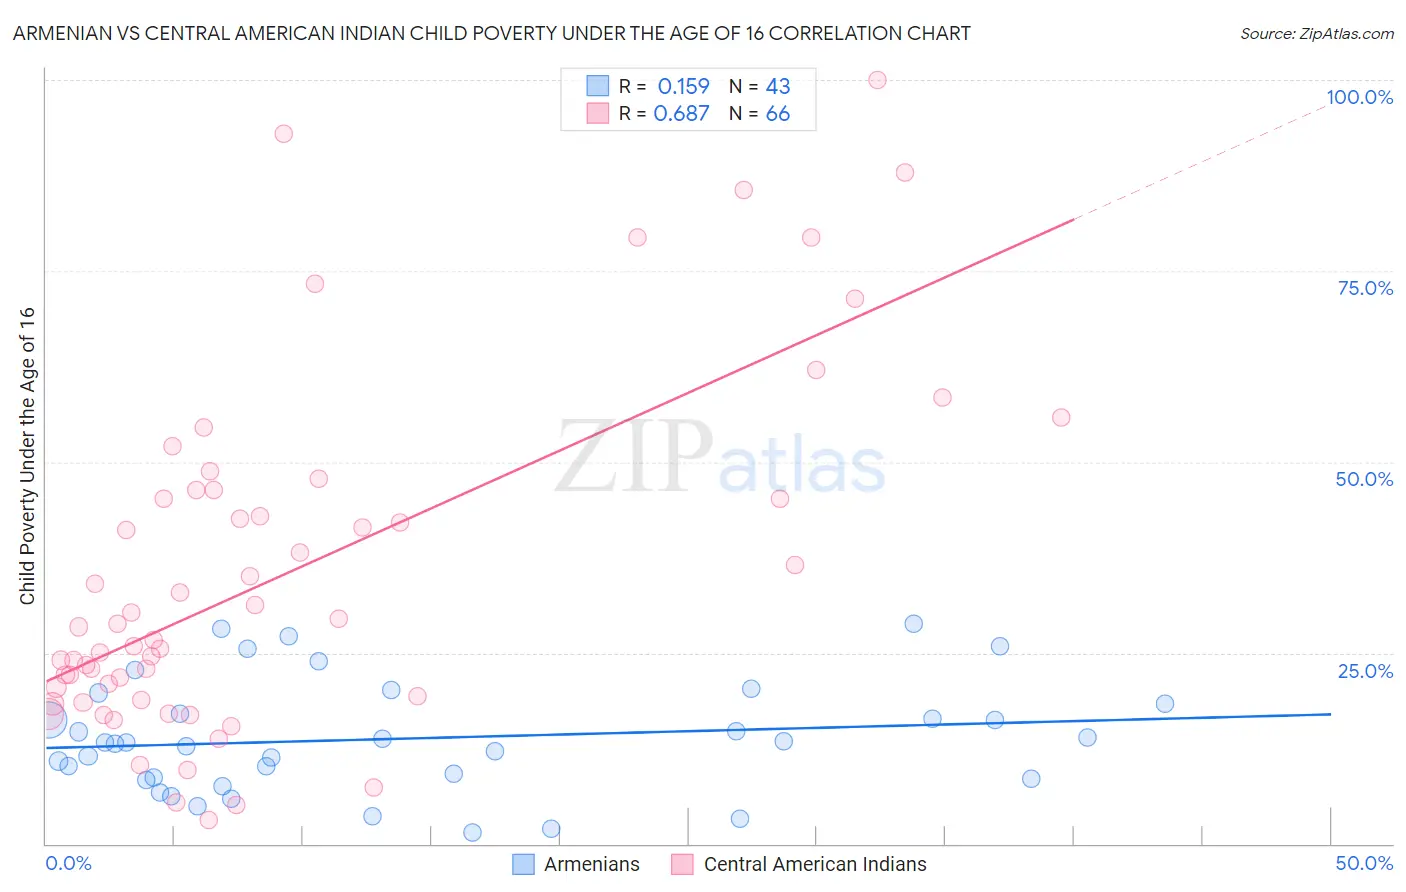 Armenian vs Central American Indian Child Poverty Under the Age of 16